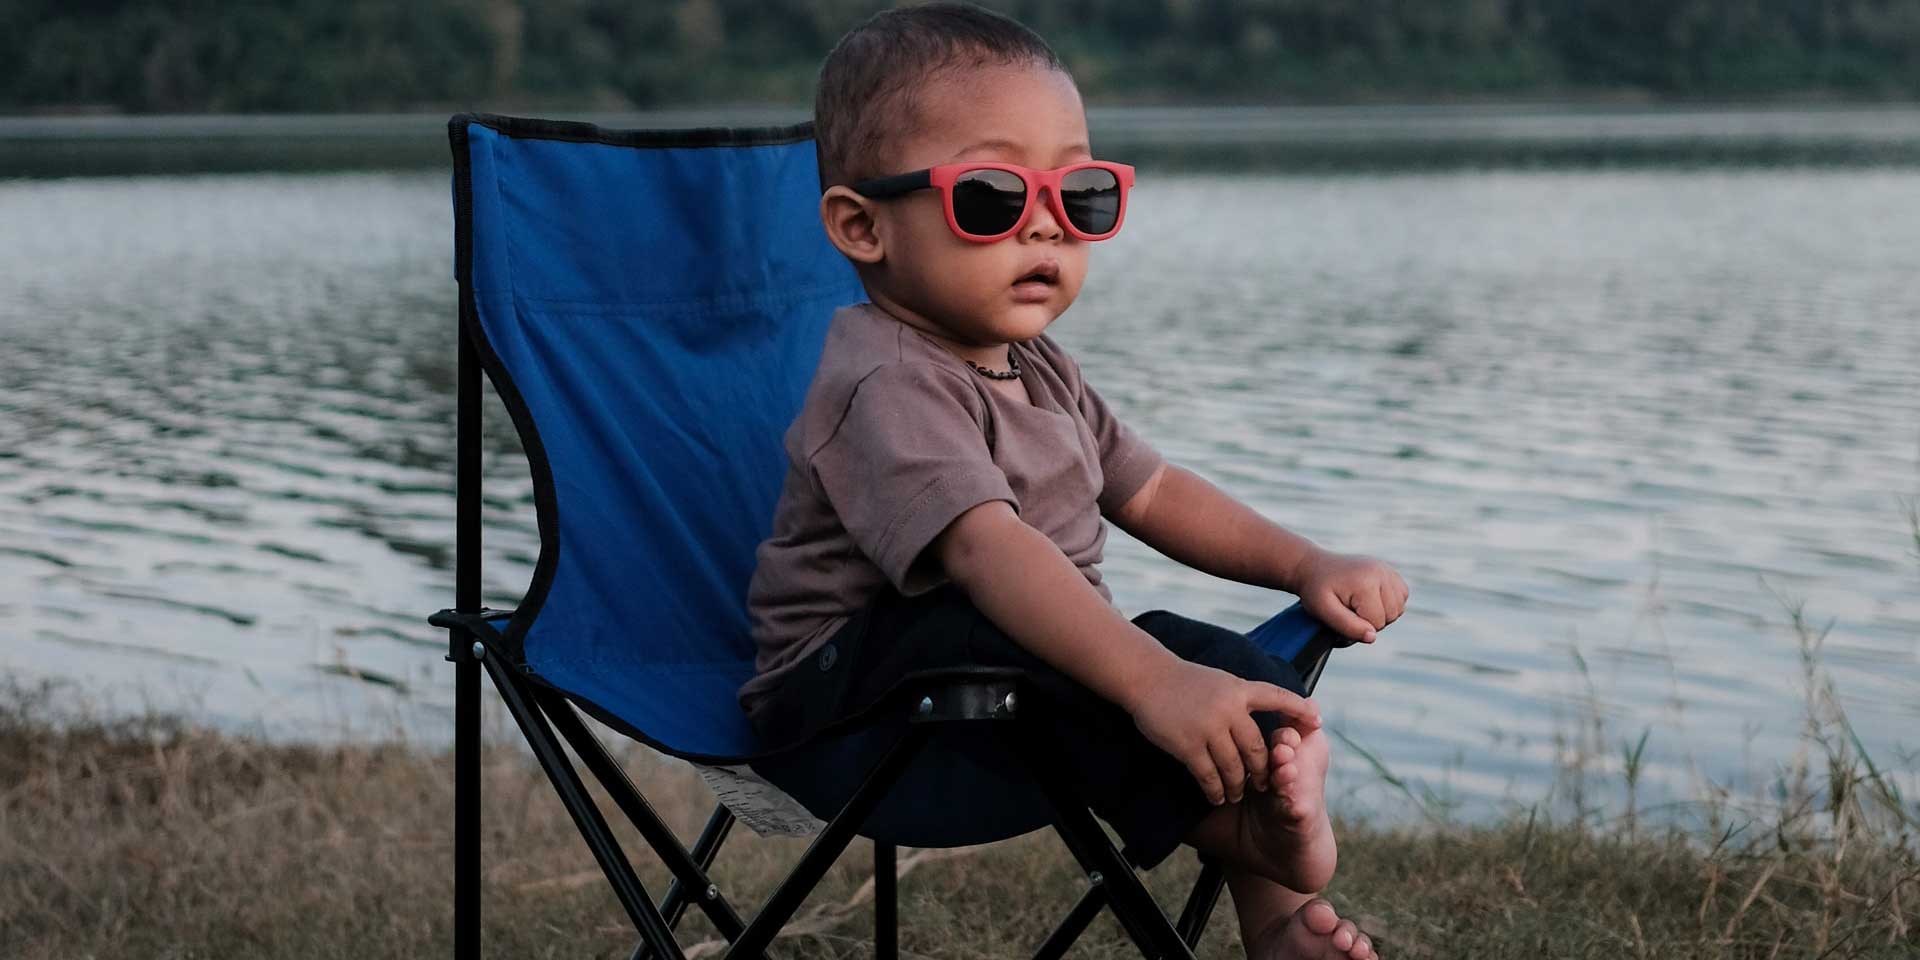 Little trendsetter chilling by the lakeside in stylish red sunglasses and a witchy vibe.